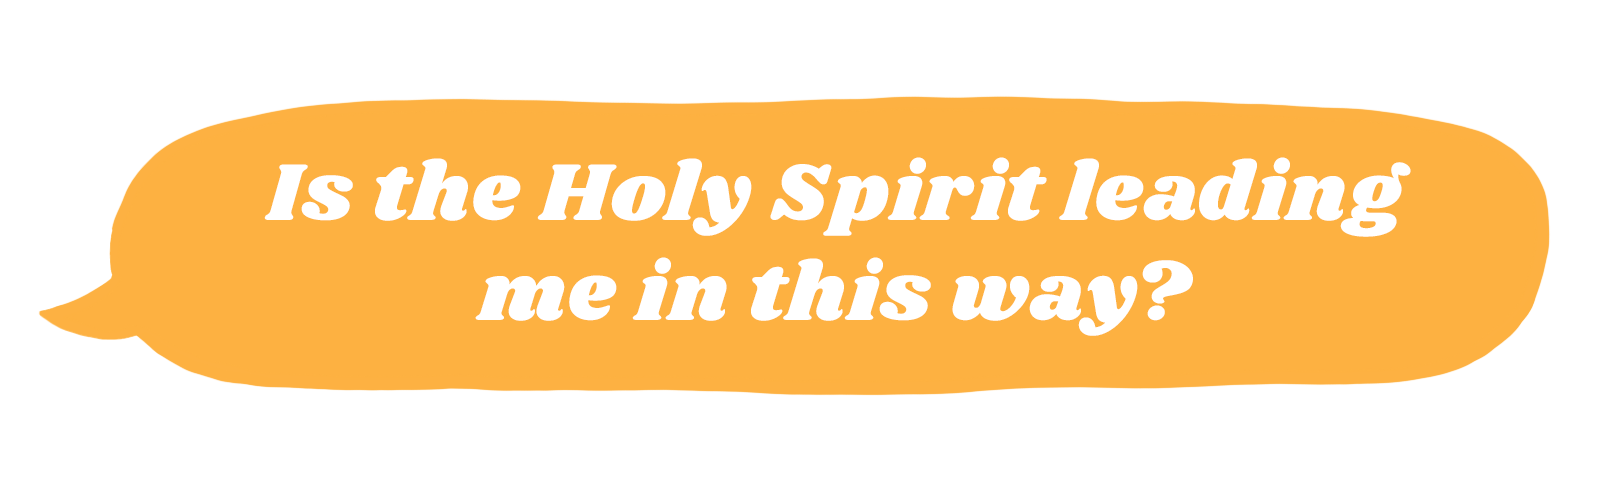 Is the Holy Spirit leading me in this way?